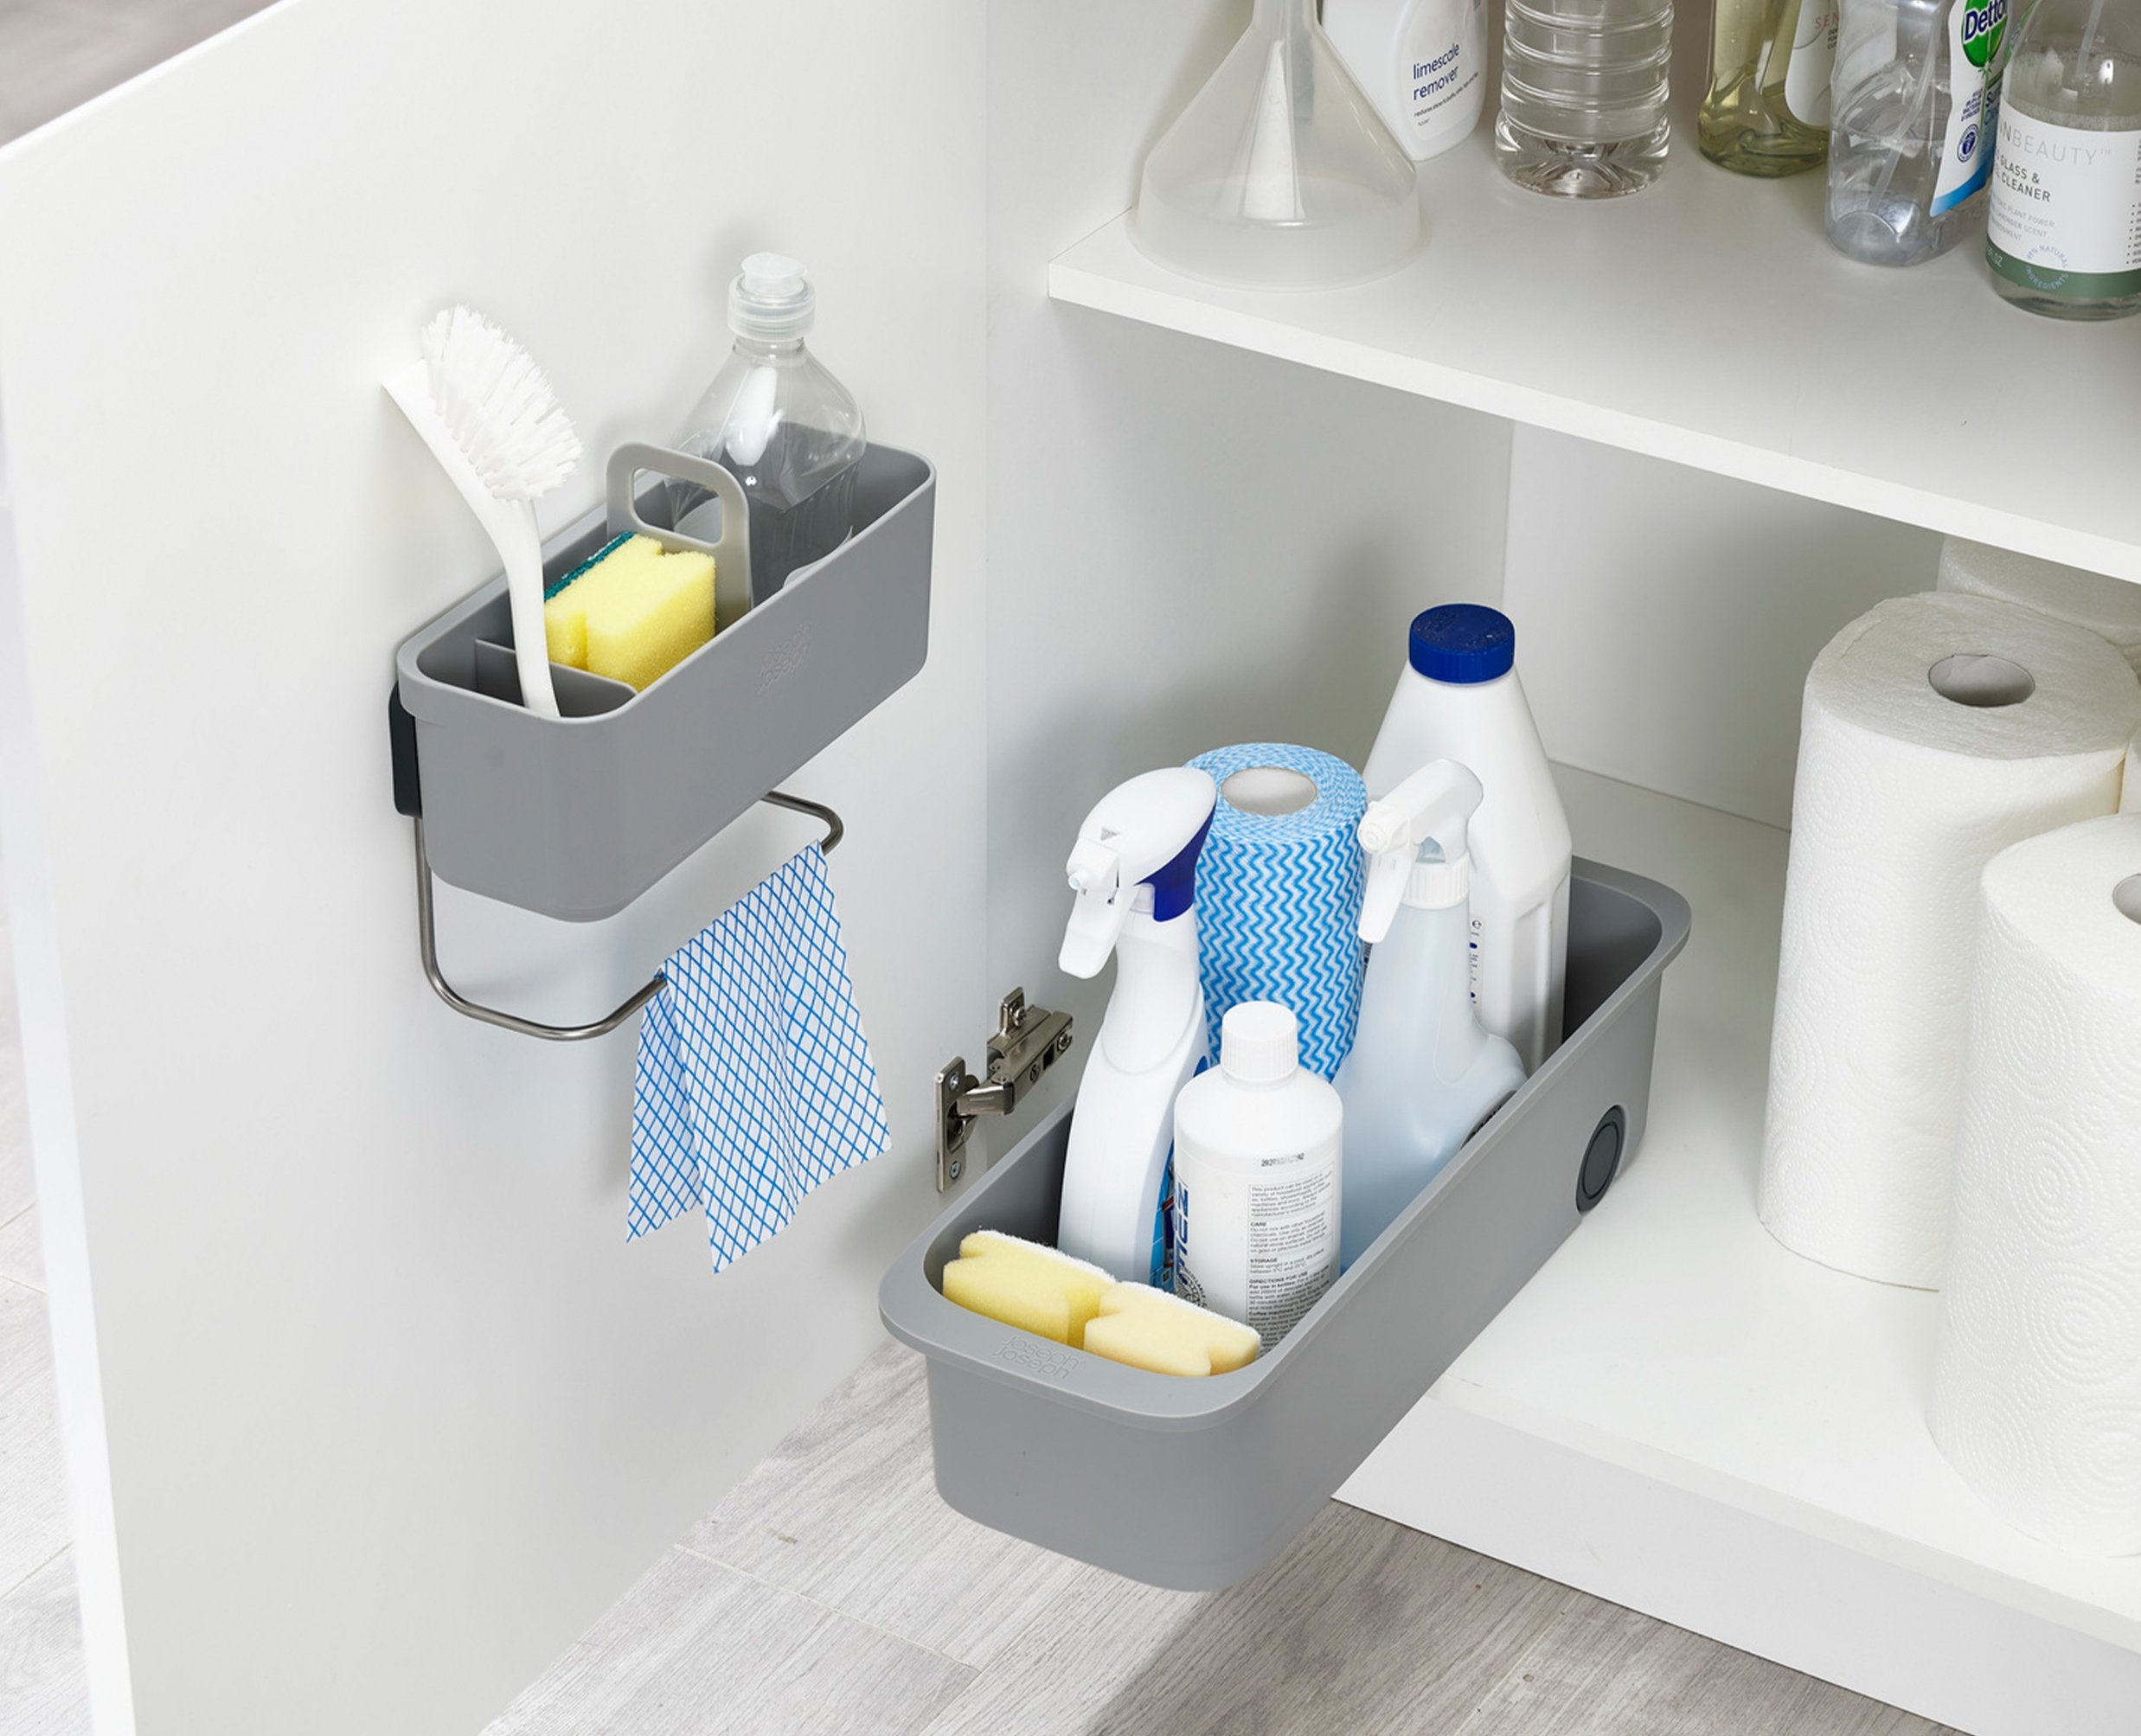 BEON.COM.AU  This handy caddy provides organised storage for a range of washing-up items but stores neatly out of sight in the cupboard under your sink so you can keep the space around your sink tidy and clutter-free.  Perfect for storing cleaning and washing-up items out of sight Ideal for brushes, sponges,... Joseph Joseph at BEON.COM.AU